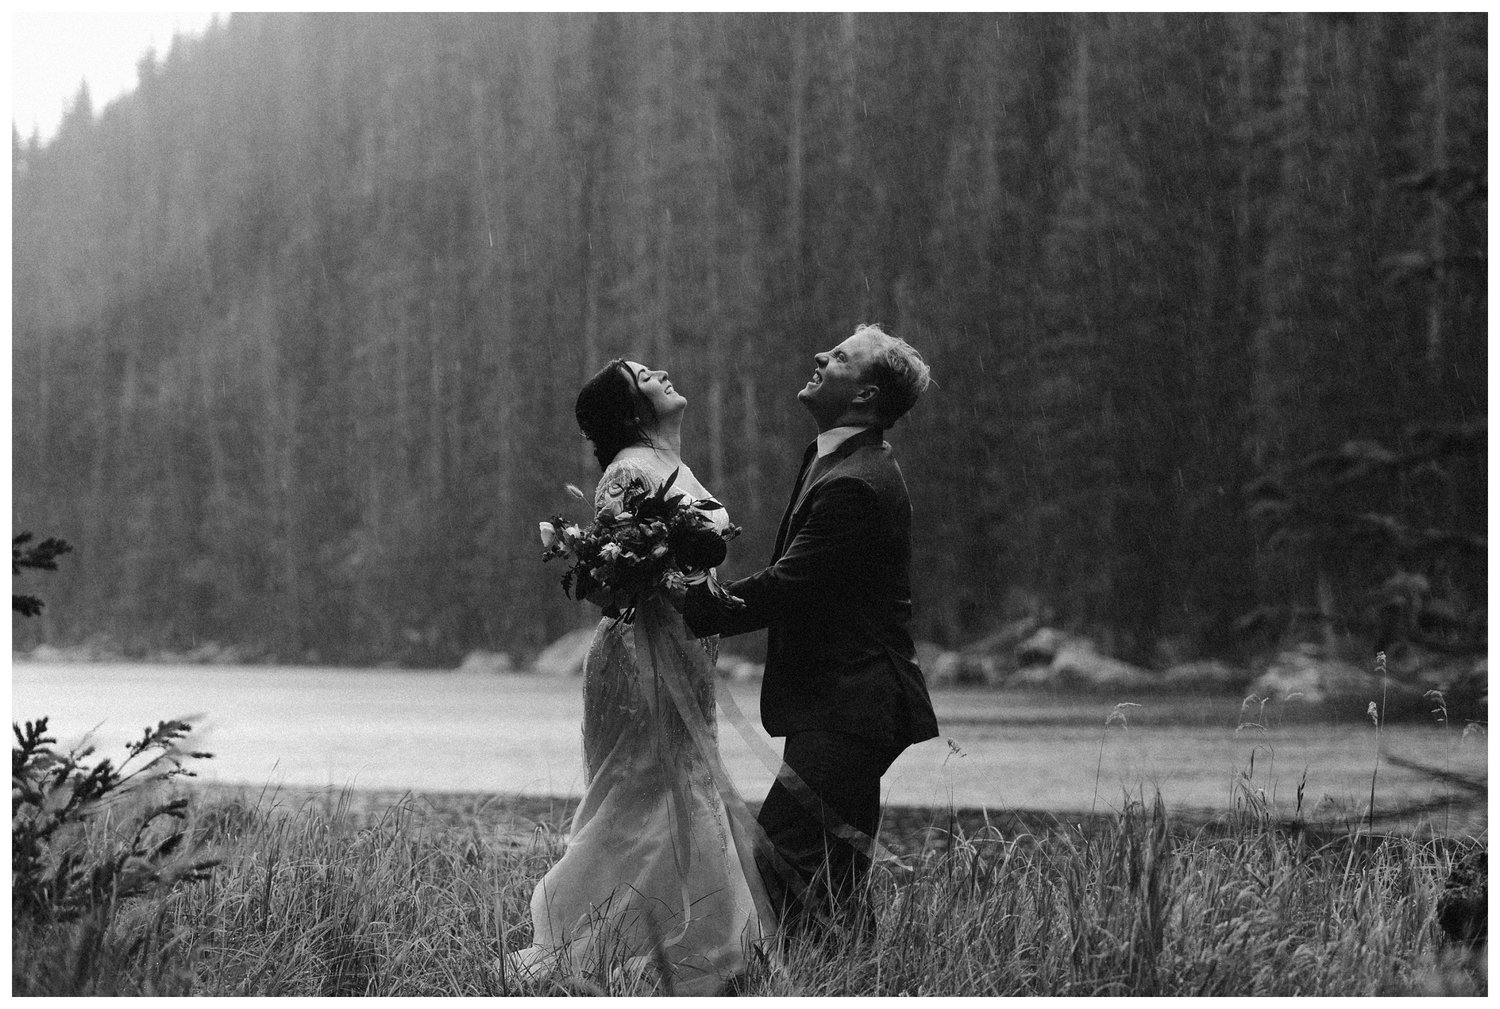 Bride and groom look up as it rains on them with lake and forest behind them. 